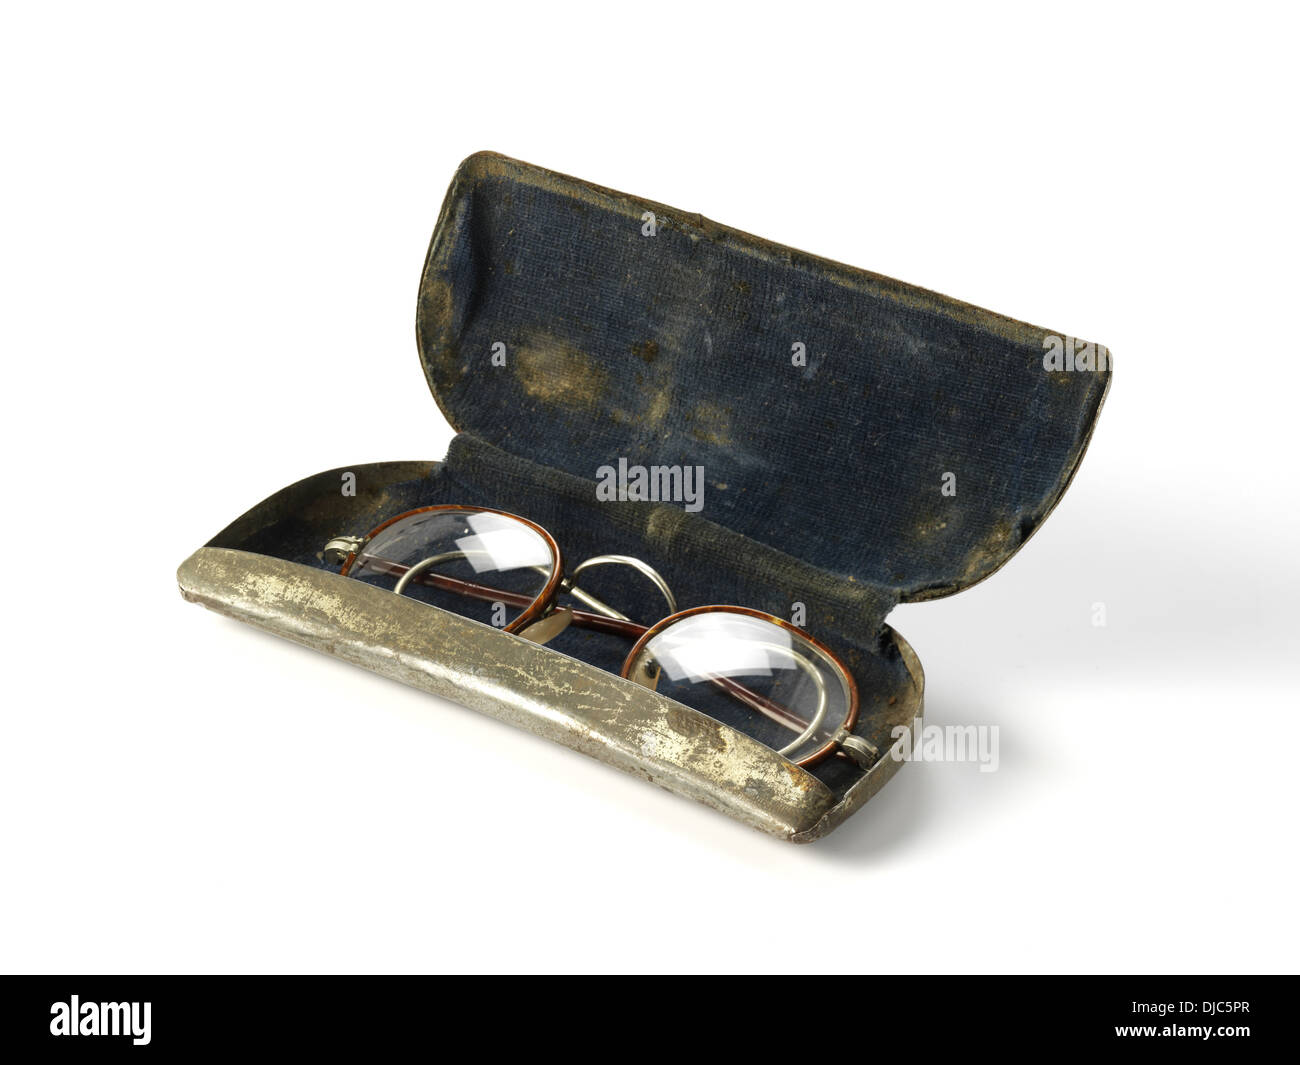 Pair of old fashioned glasses with wire frames in a metal case Stock Photo